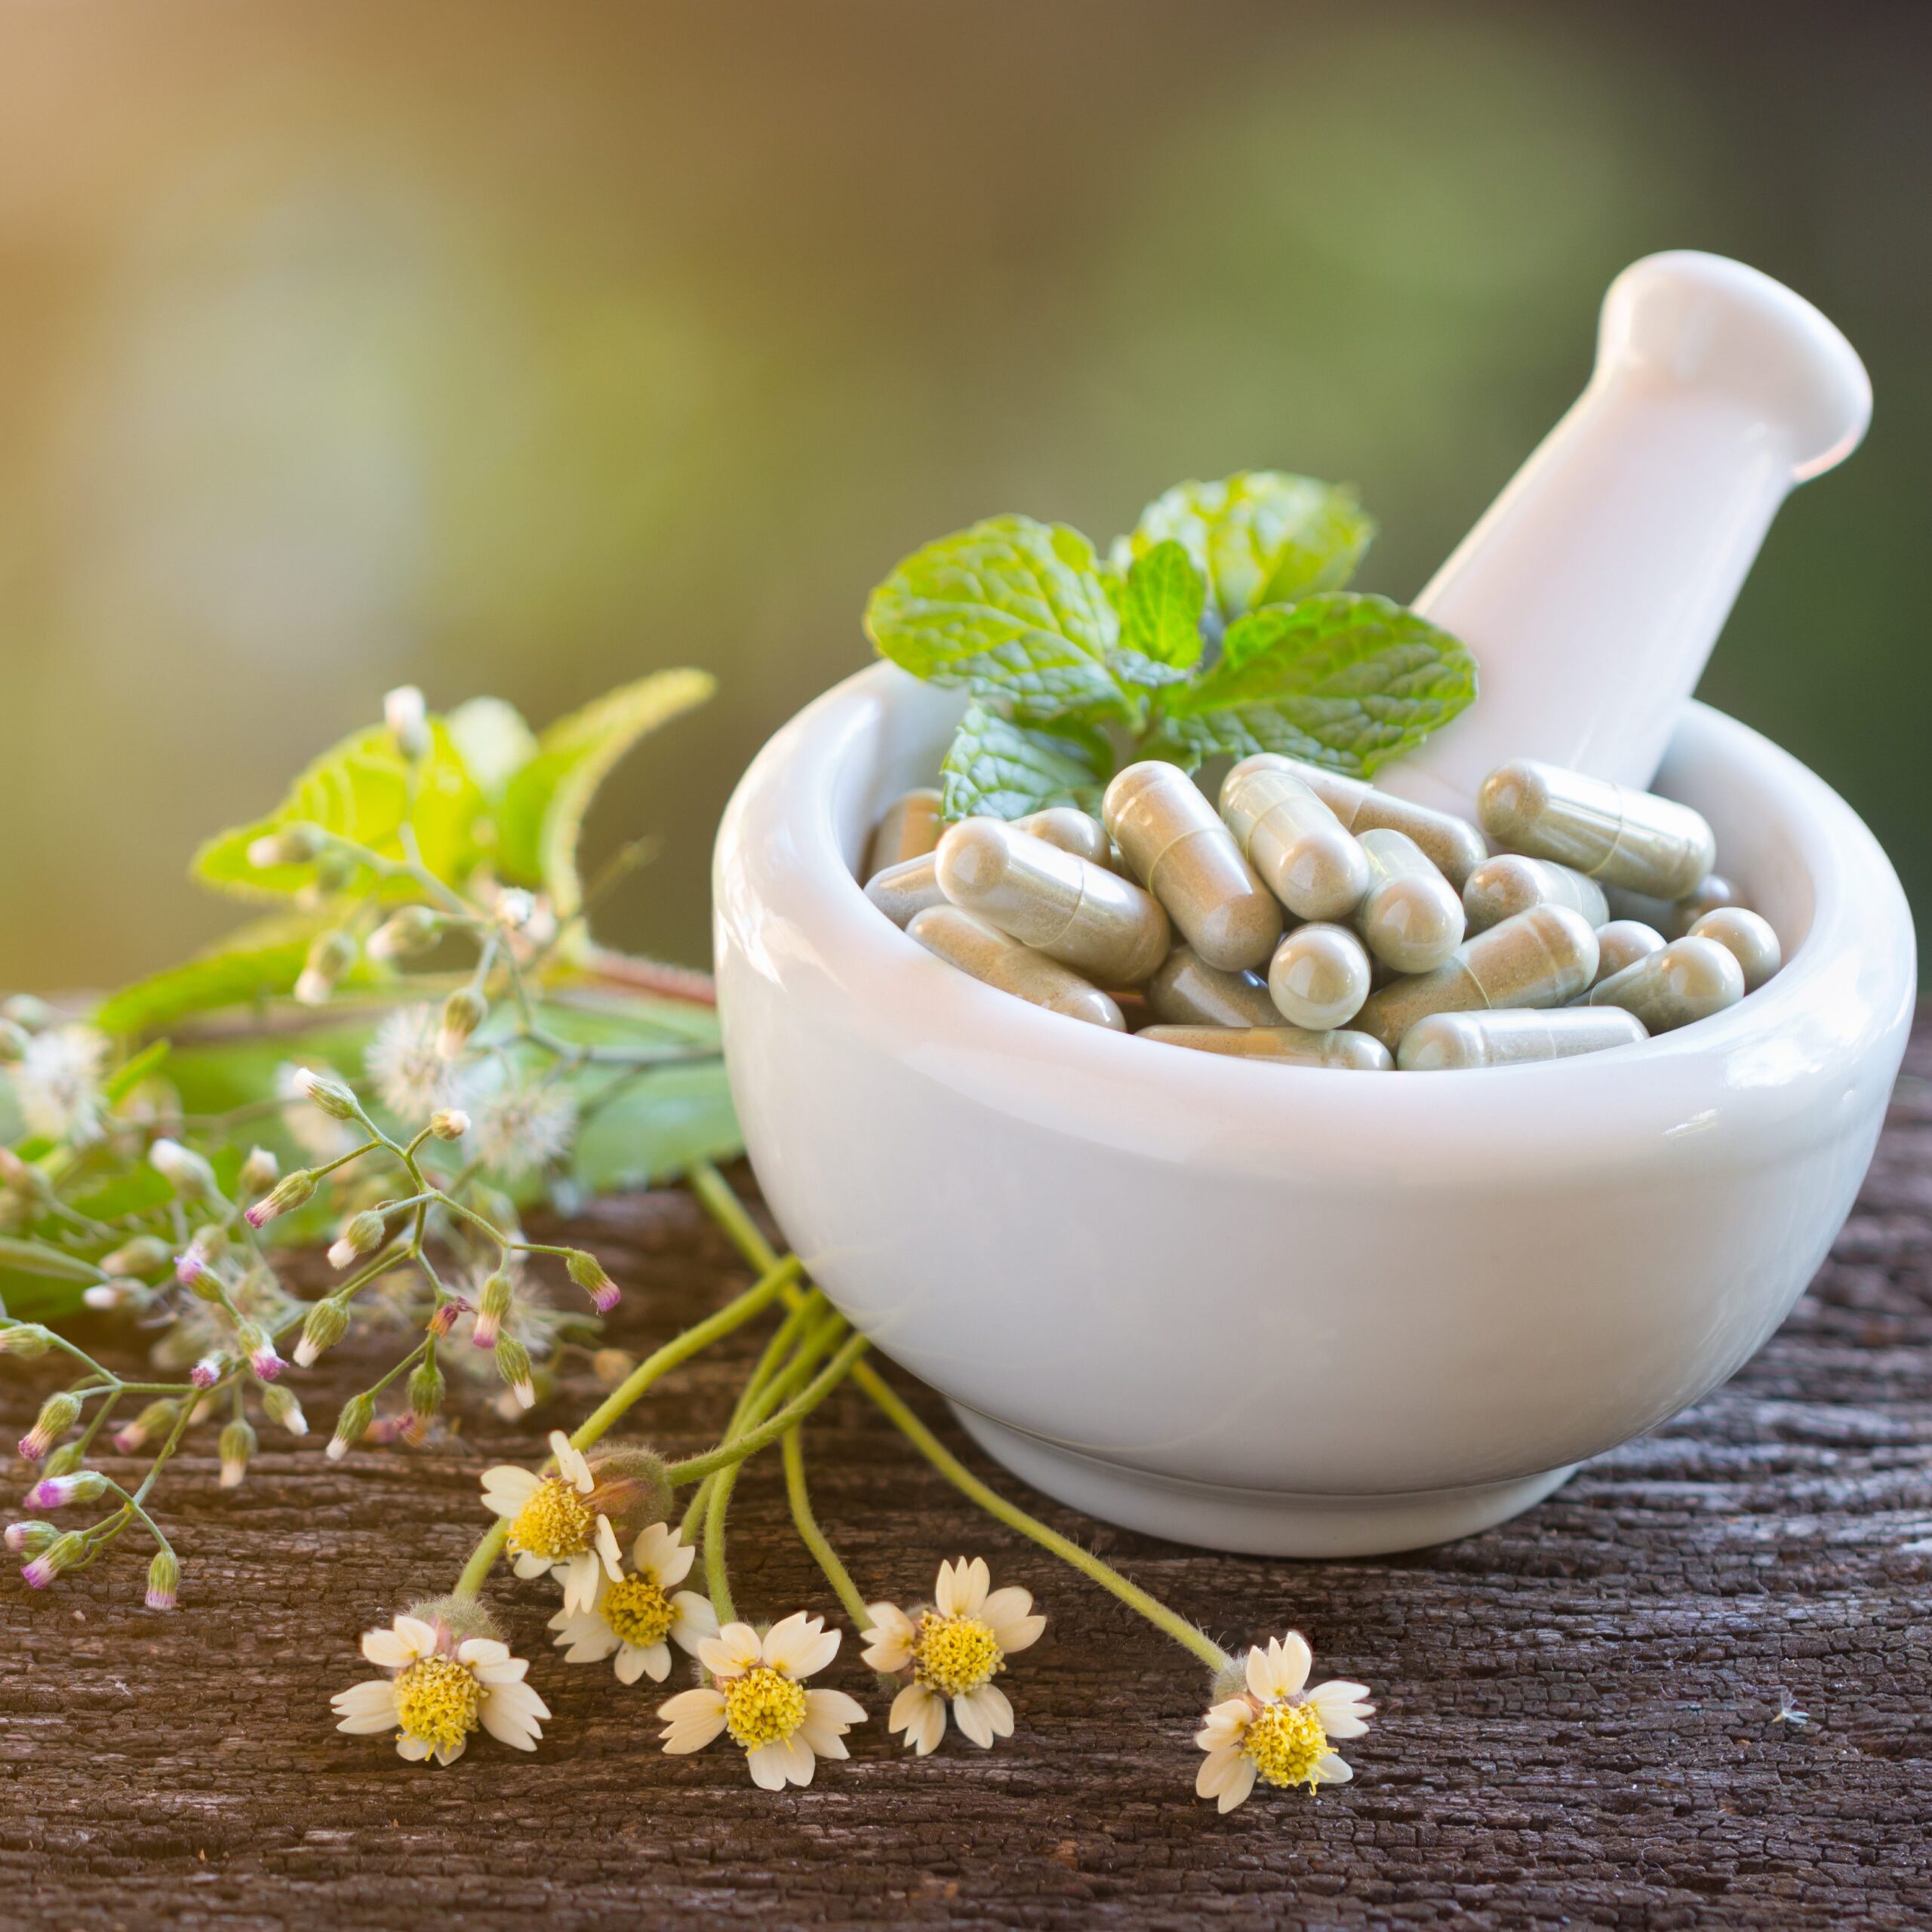 Herb Capsules in ceramic bowl with herbs and flowers decorating area